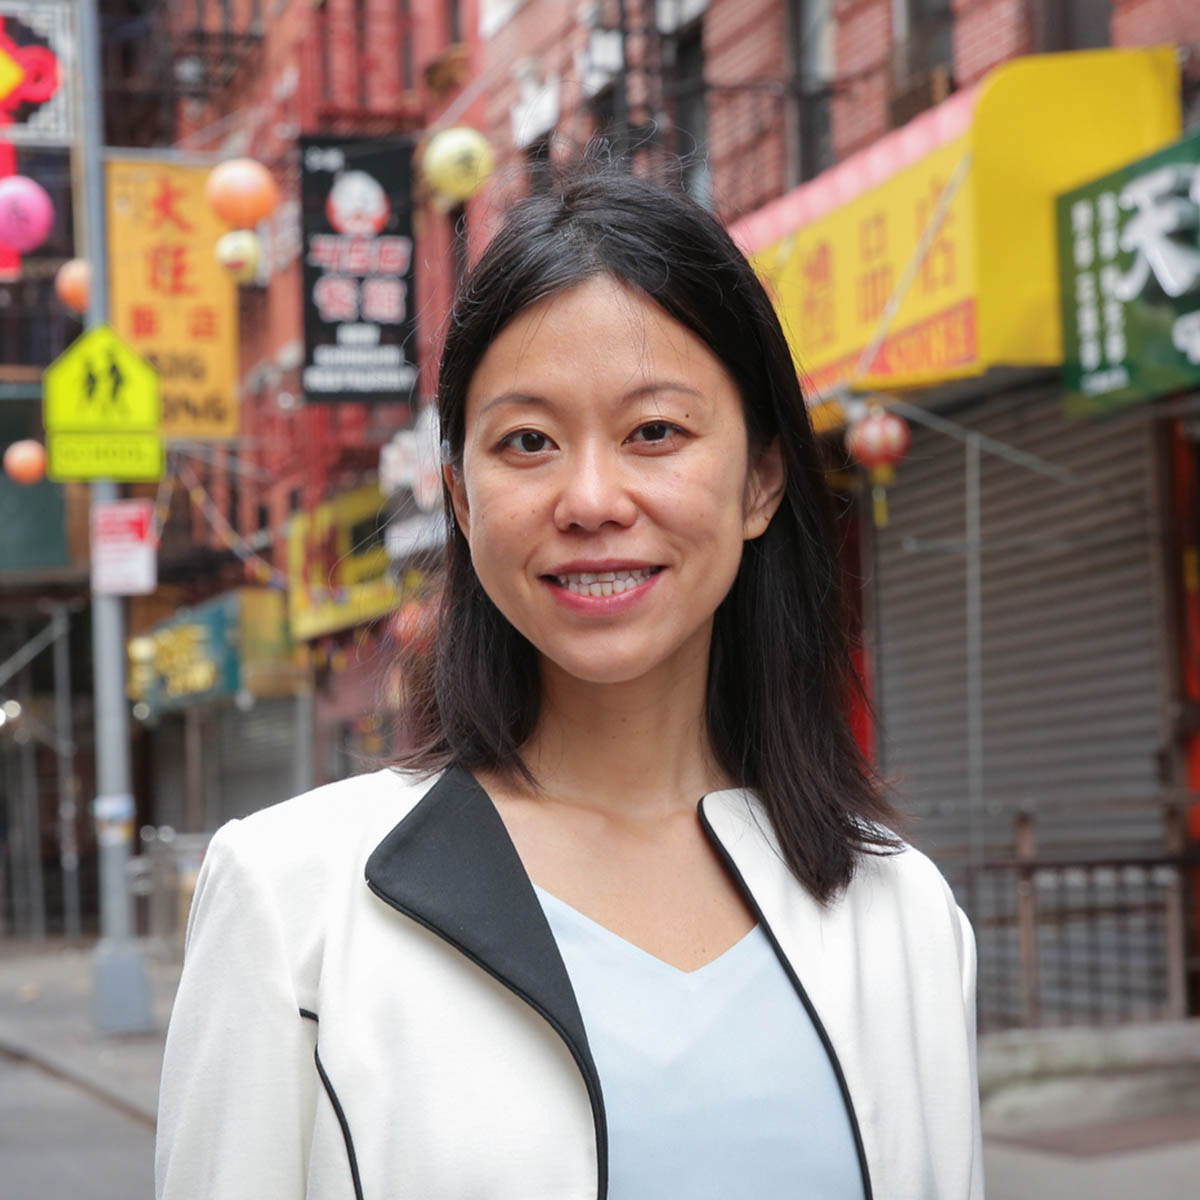 Gynecologic oncology care now available in Chinatown